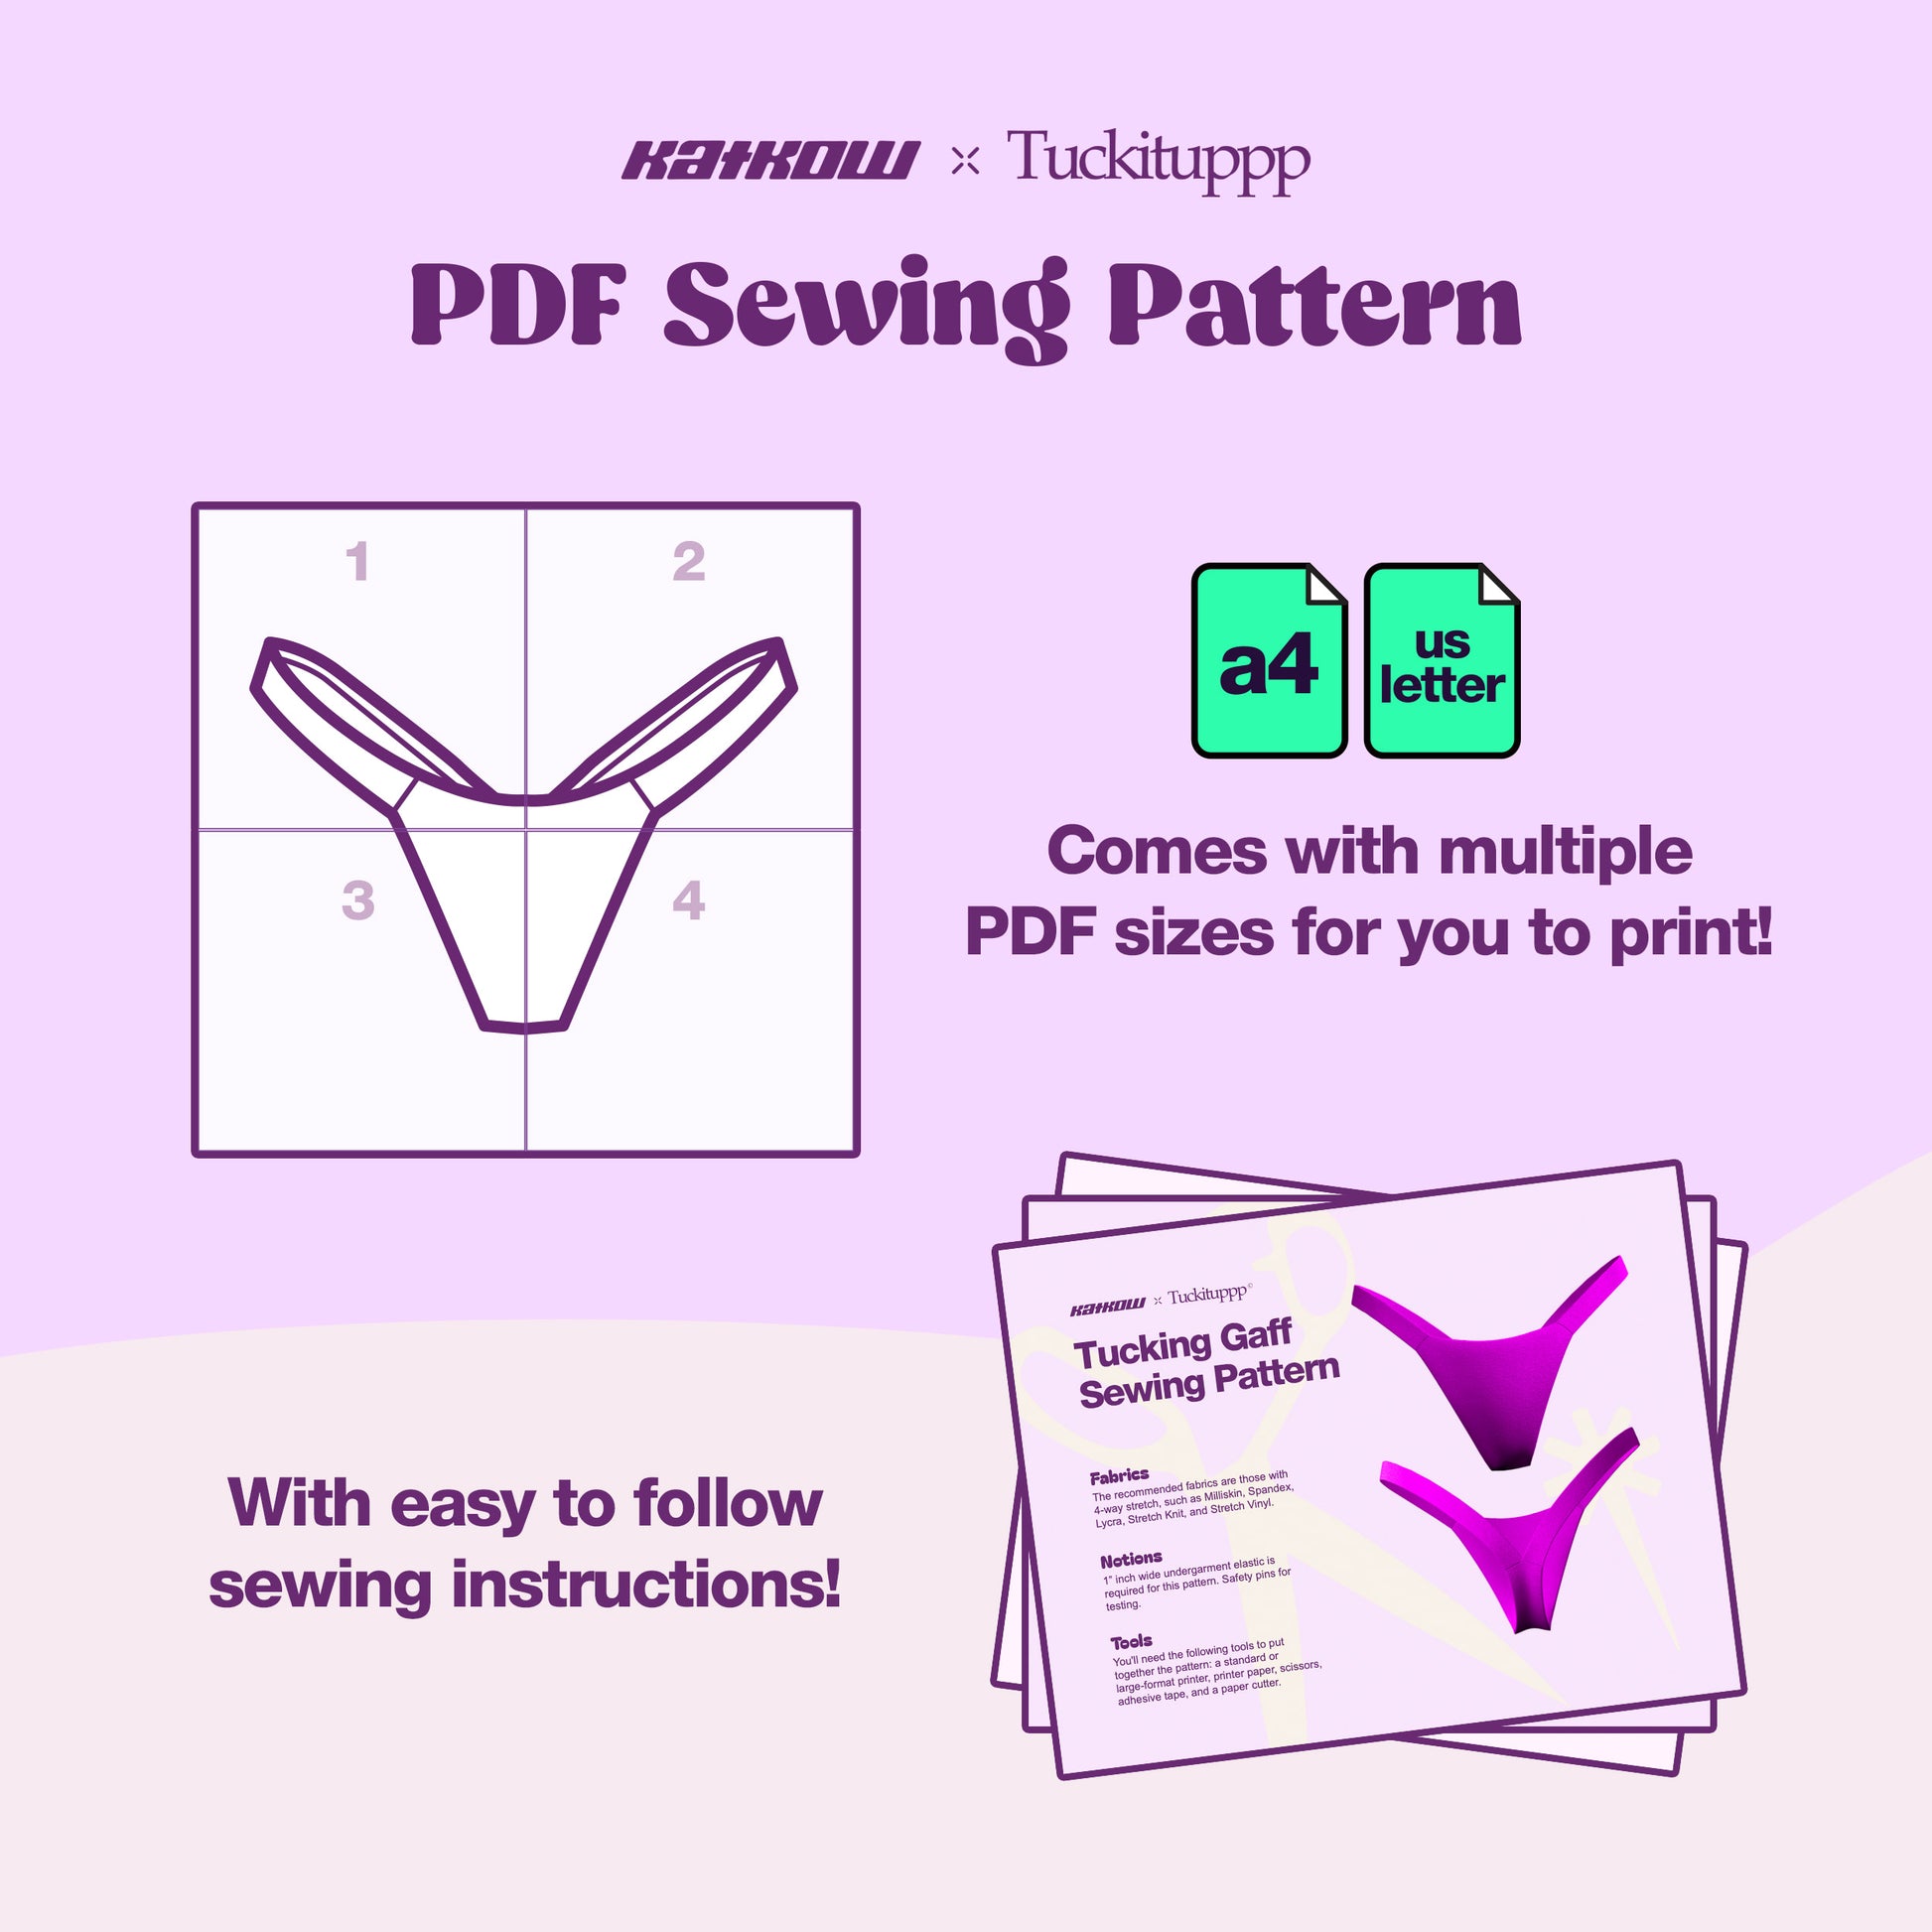 Katkow and Tuckituppp Collaboration Tucking Gaff Sewing Pattern Undergarment Thong Drag Queen Transgender Costume Mens Lingerie Plus Size Cosplay